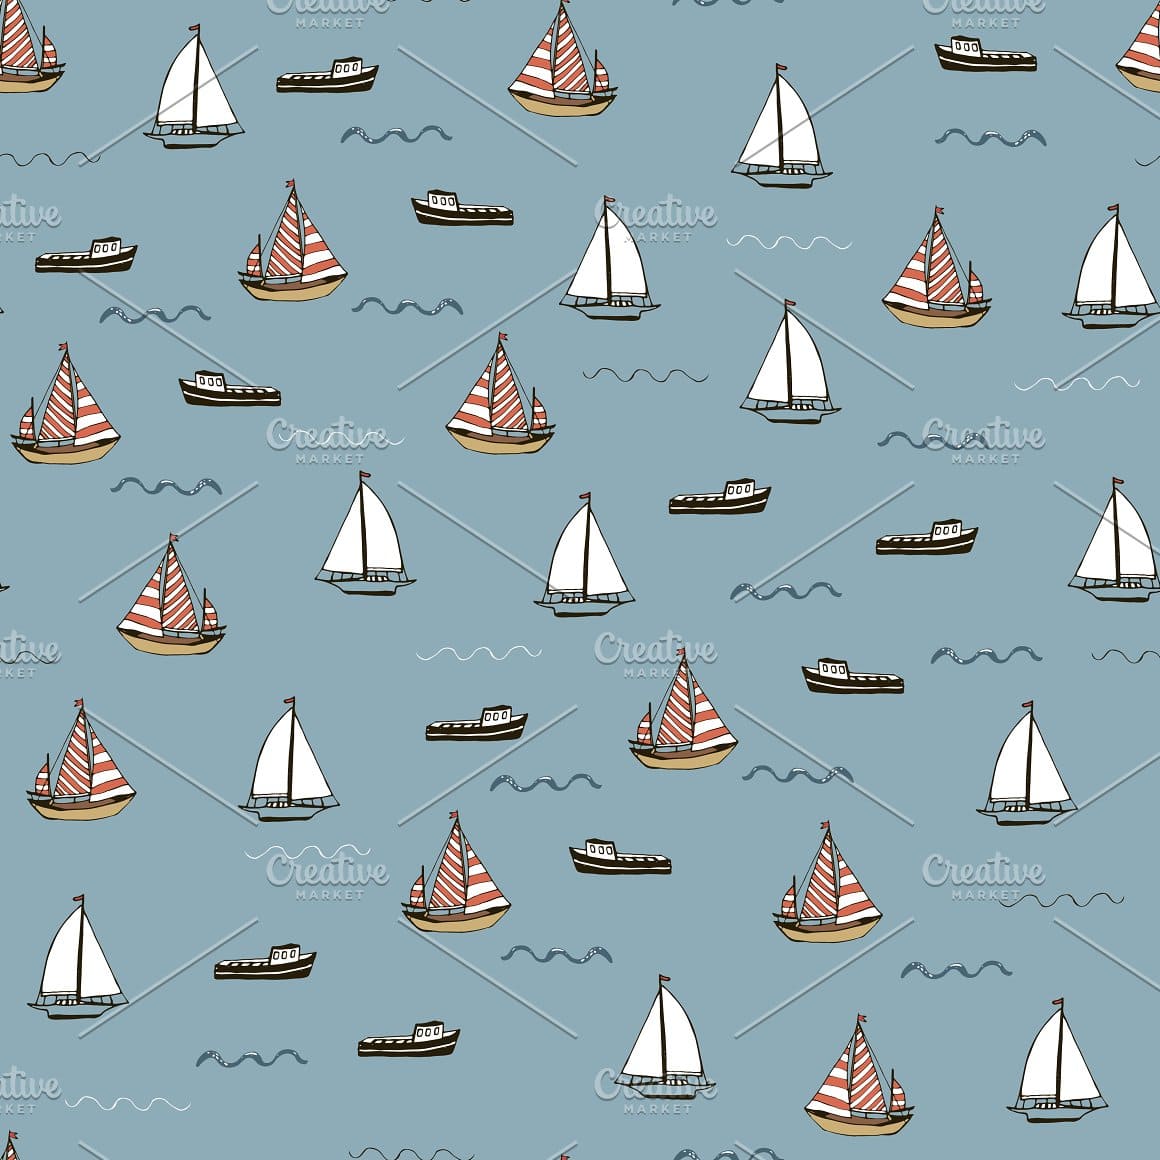 Yachts with sails on a light blue background.